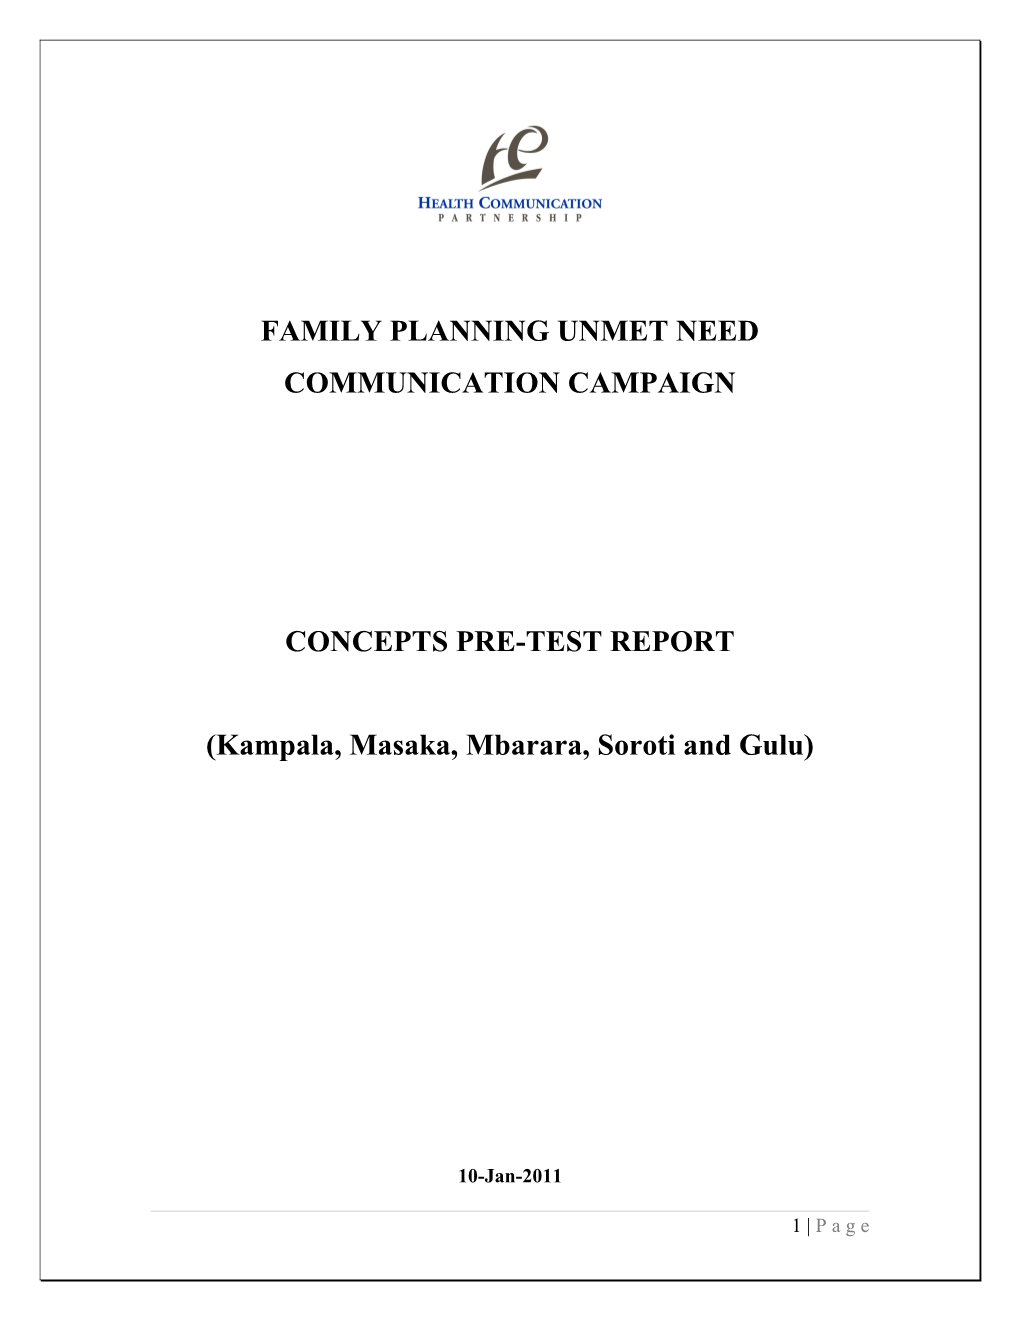 Family Planning Unmet Need Communication Campaign